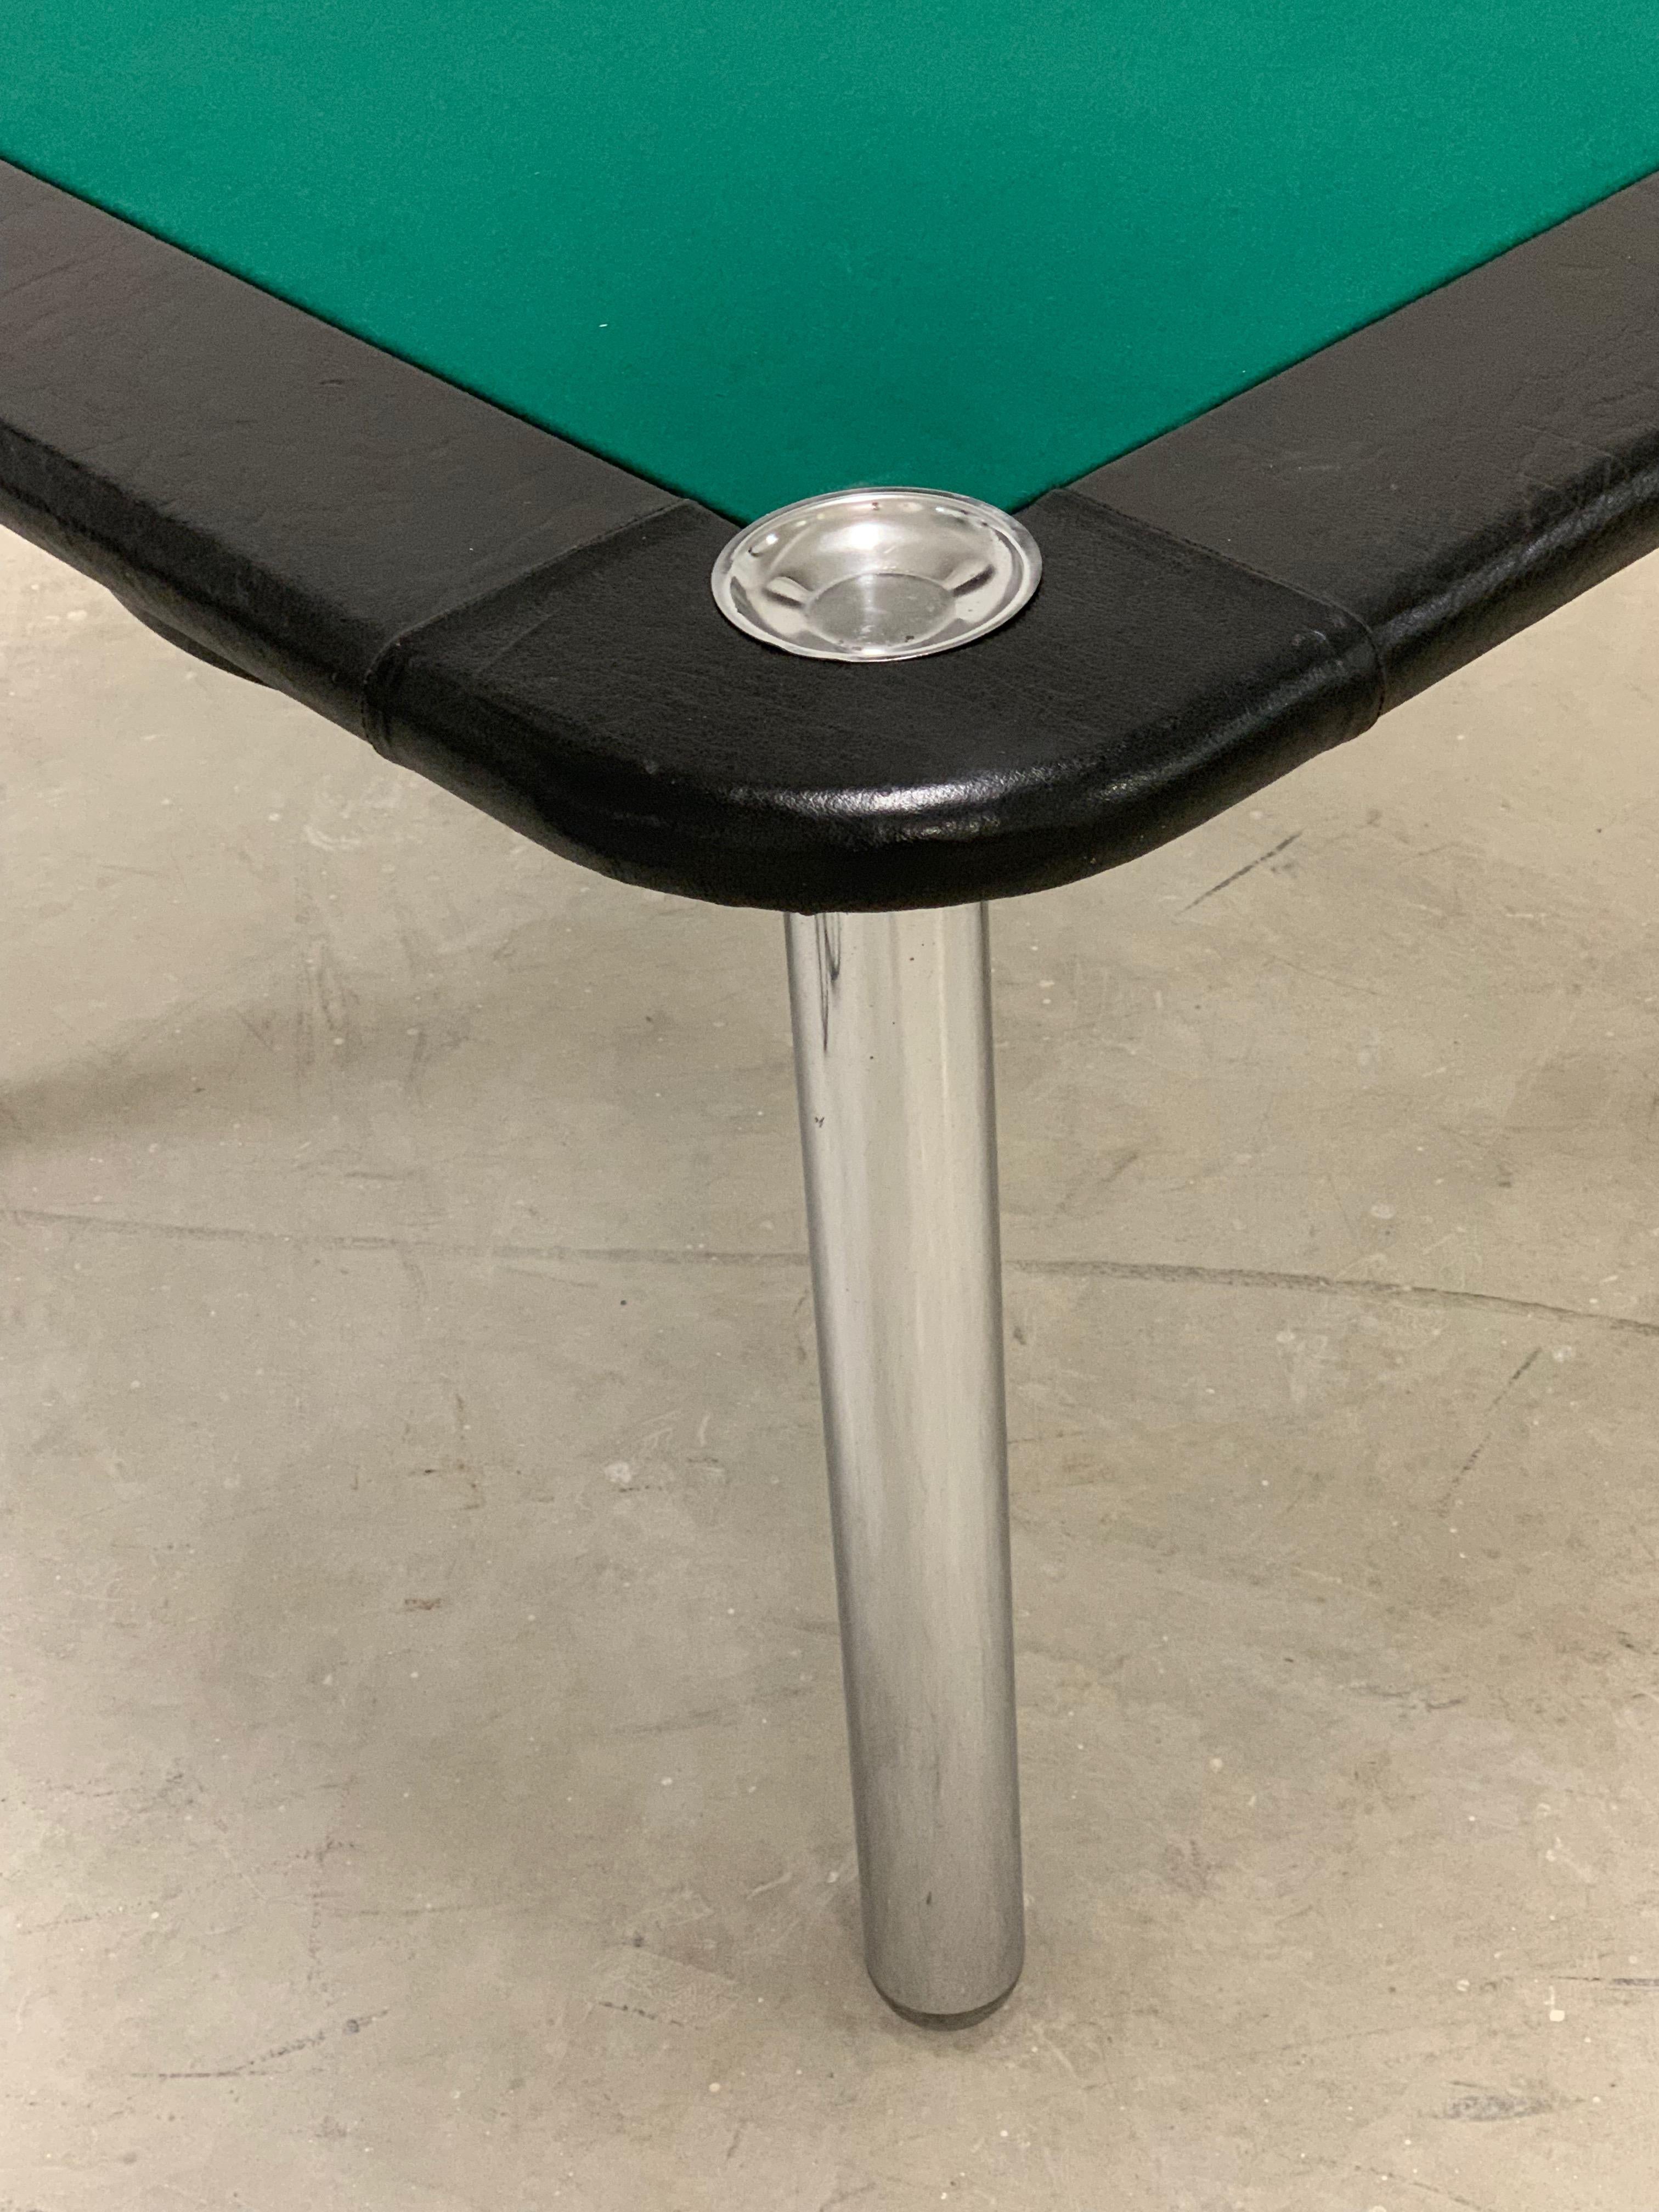 Leather and Chromed Steel Italian Game Table attributed to Zanotta, 1960s For Sale 11